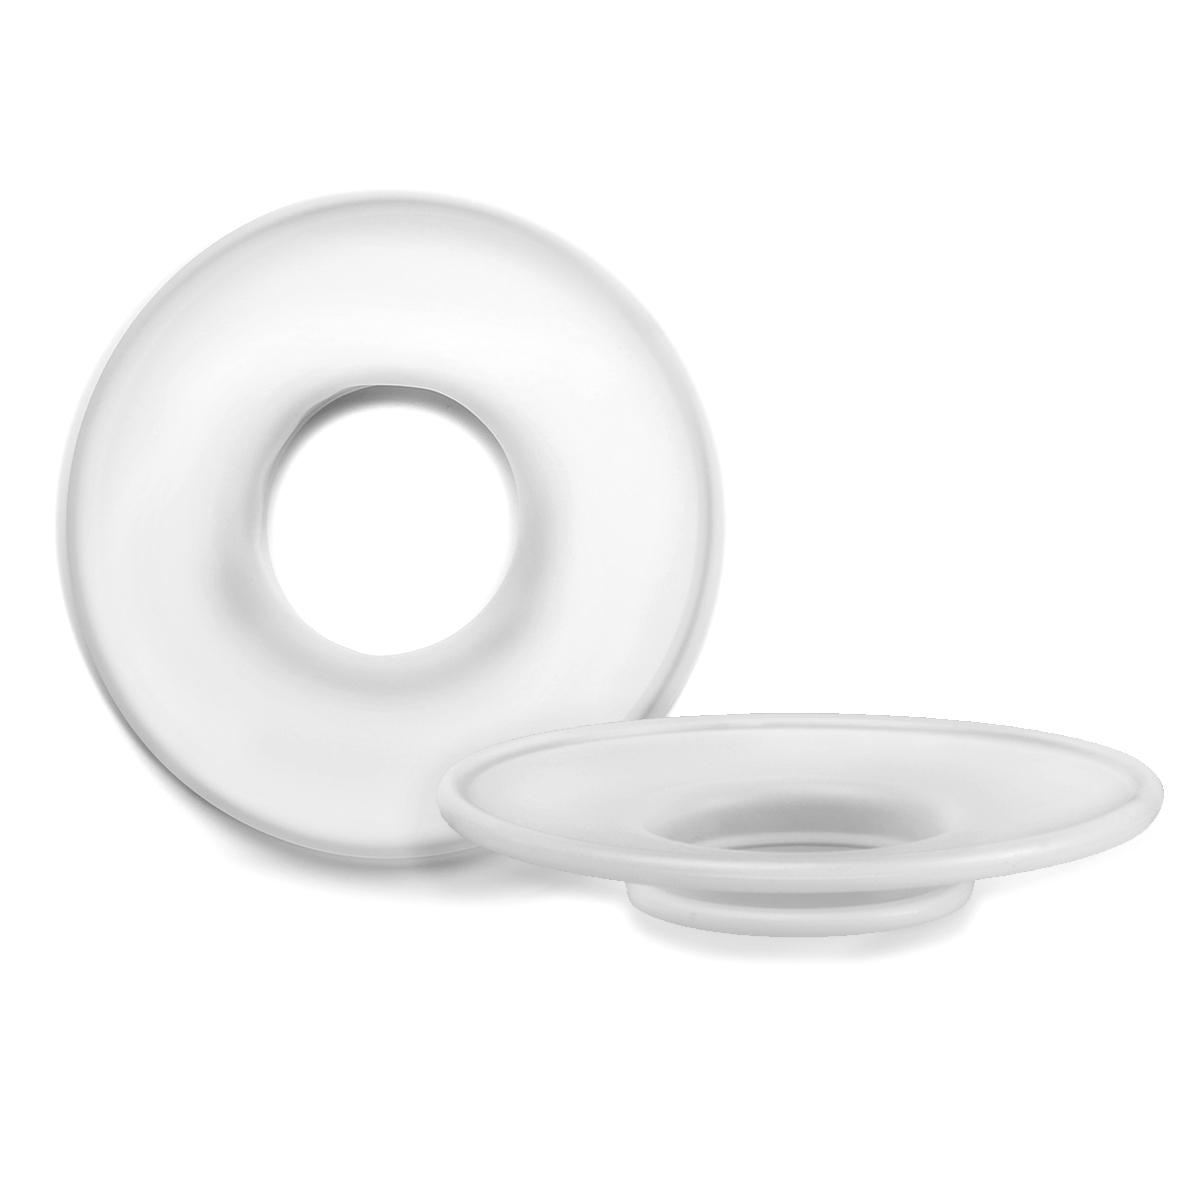 Surgical Accessories, Dual-ring Wound Protector, Reduce Superficial Surgical Site Infections.